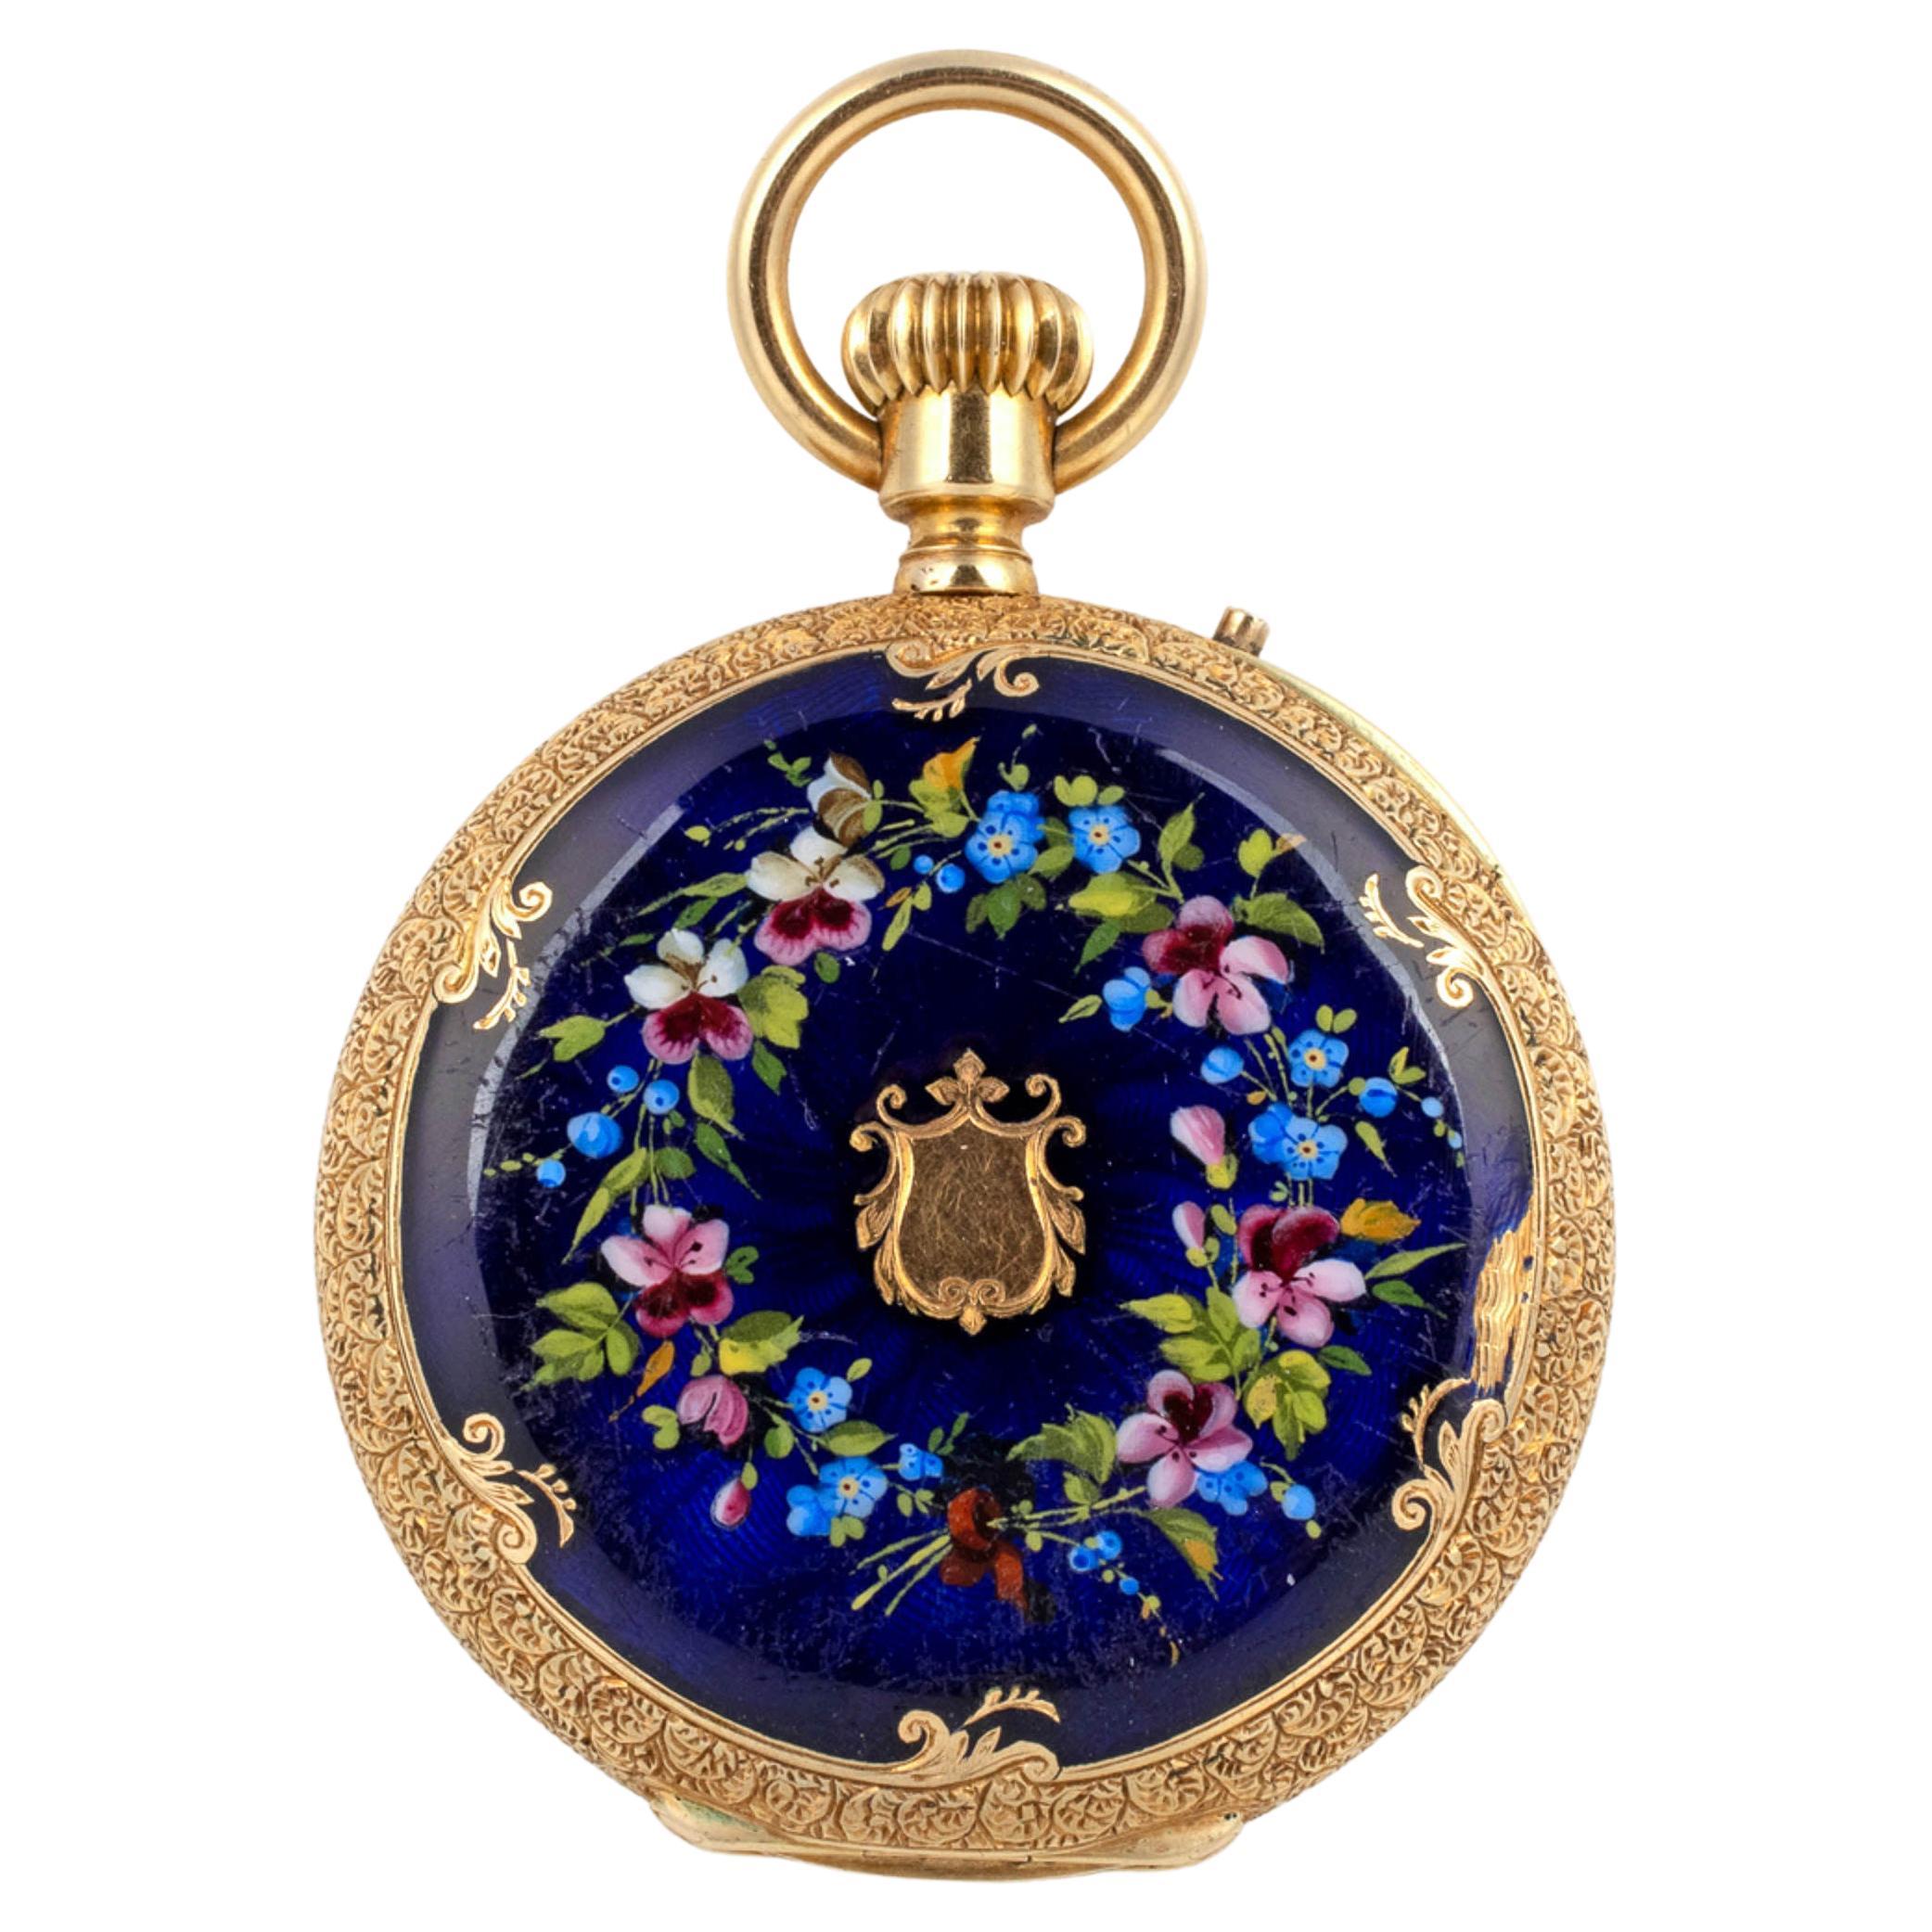 Swiss Open-Faced 18k Gold and Enamel Pocket Watch, by Martin & Marchinville